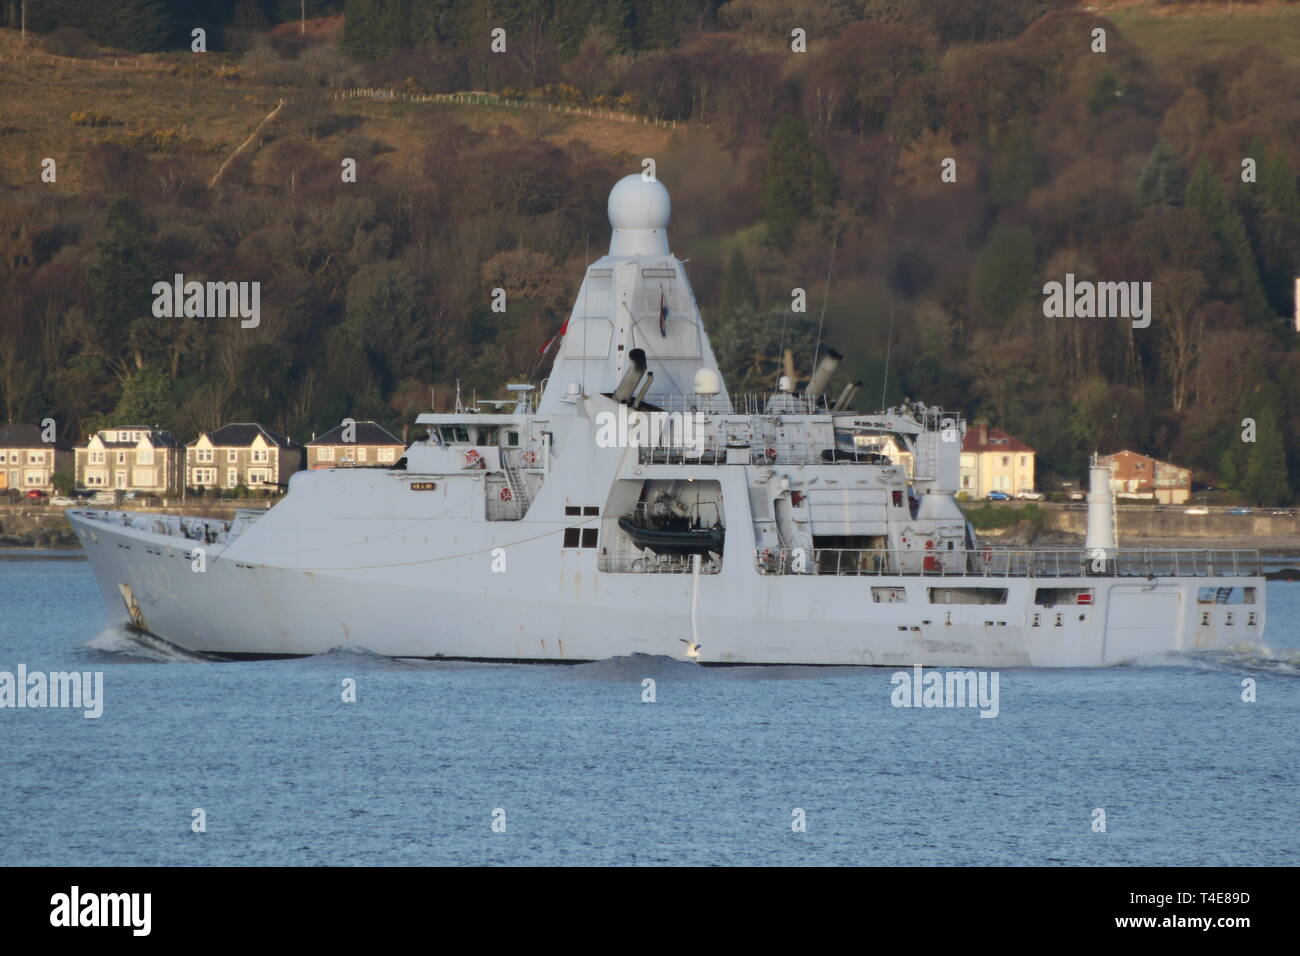 HNLMS Friesland (P842), a Holland-class patrol vessel operated by the Royal Netherlands Navy, passing Gourock during Exercise Joint Warrior 19-1. Stock Photo